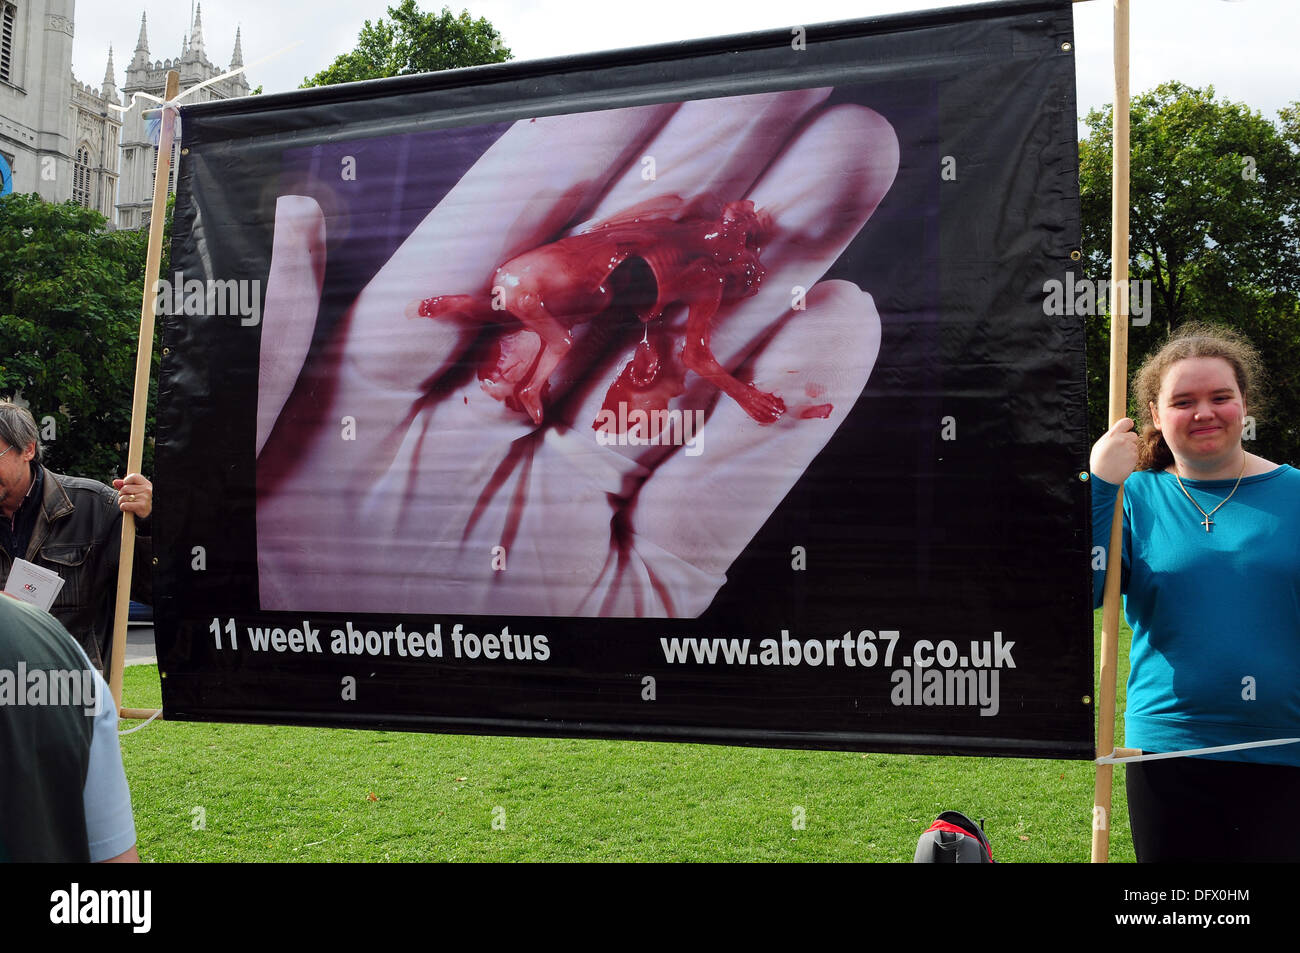 London UK, 9th Oct 2013 : Activist from Abort67 holding plastic replica of 11 week aborted foetus.. See Li / Alamy, Live News Stock Photo